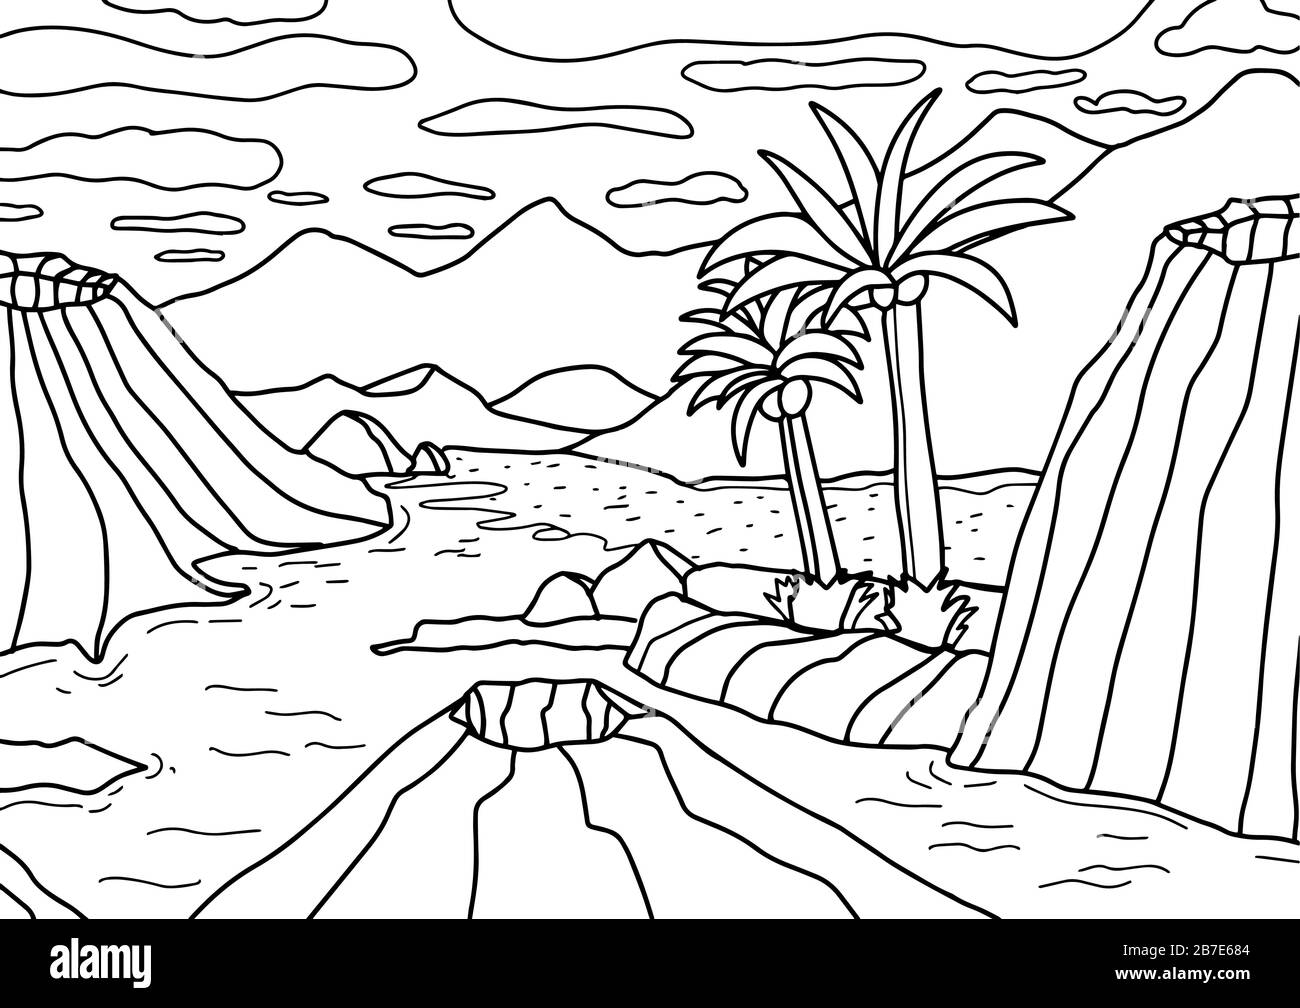 Mountains, volcanoes and palm trees by the ocean. Coloring book for children and adults. antistress coloring page. Vector outline illustration. Stock Vector